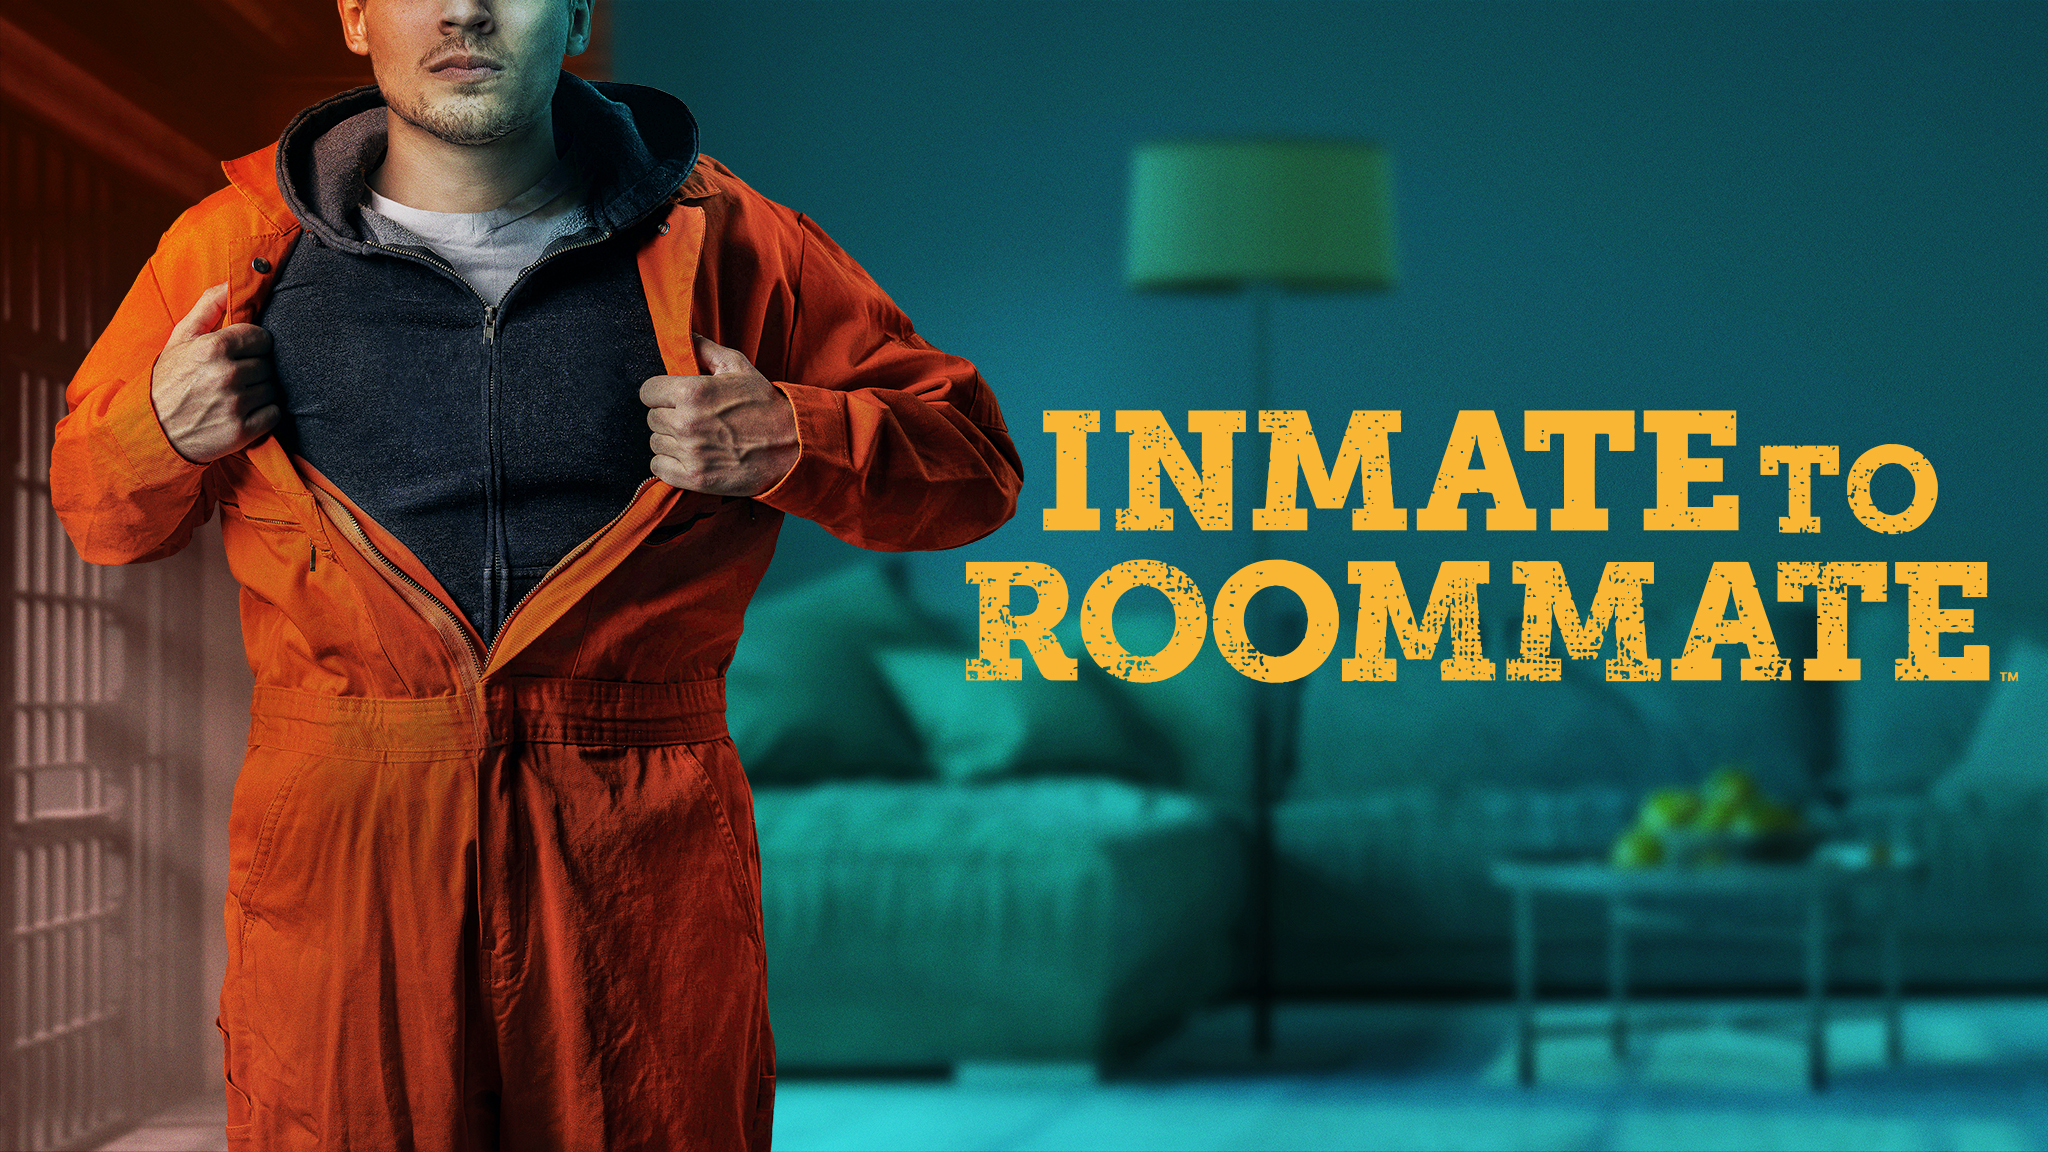 Inmate to Roommate